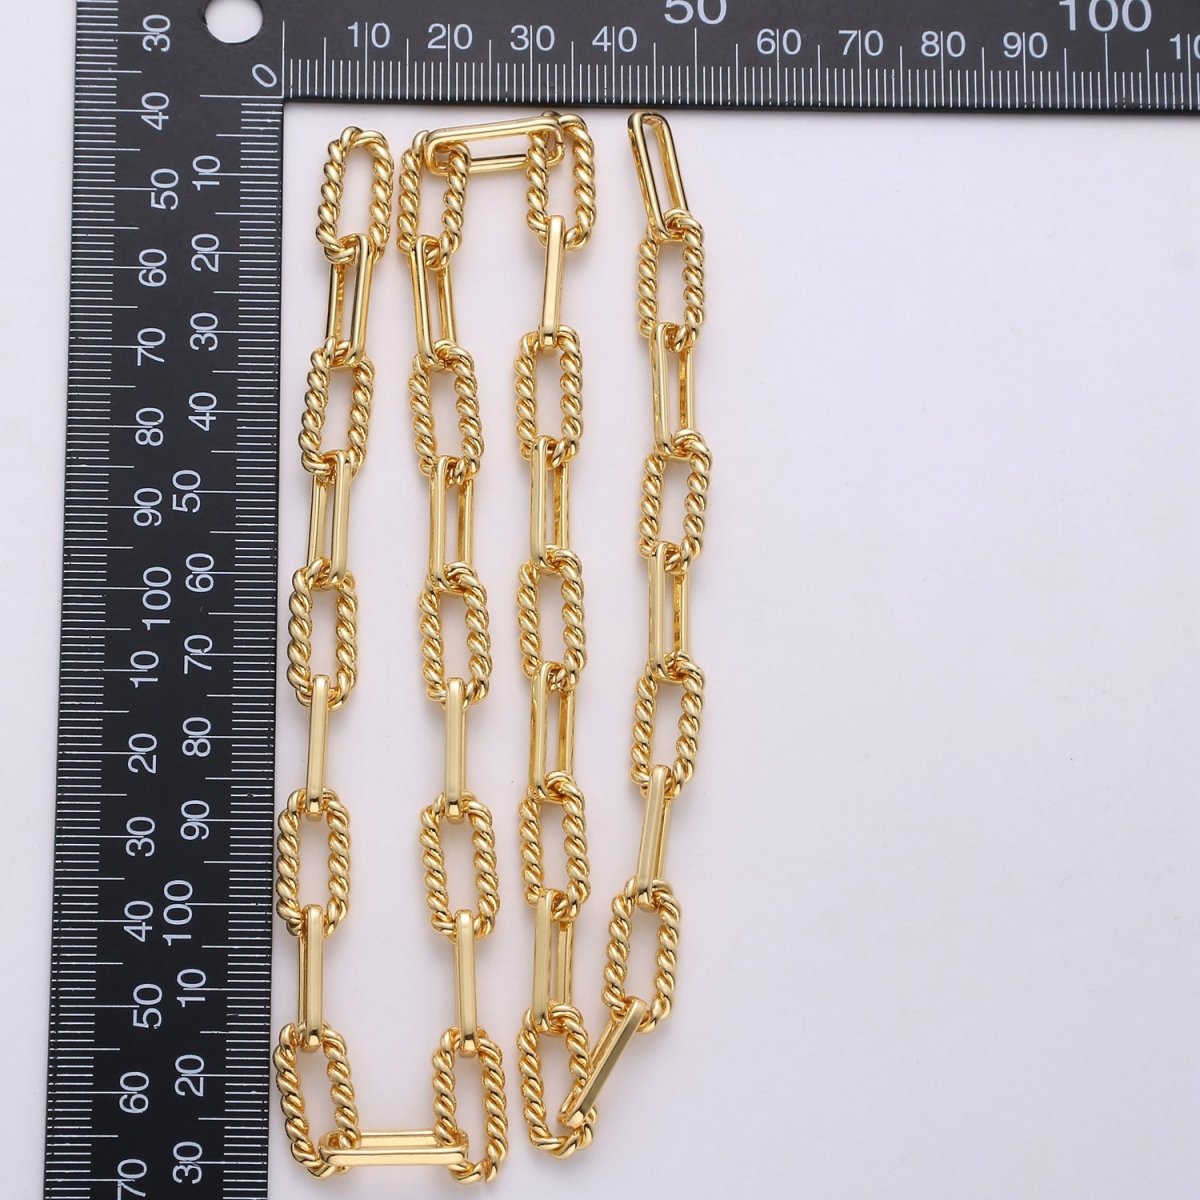 24K Gold Filled 2.5mm Thickness Twisted UNIQUE PAPER CLIP Chain By Yard, Gold Filled Rolo Cable Chain Thickness 2mm | ROLL-279, ROLL-280 Clearance Pricing - DLUXCA